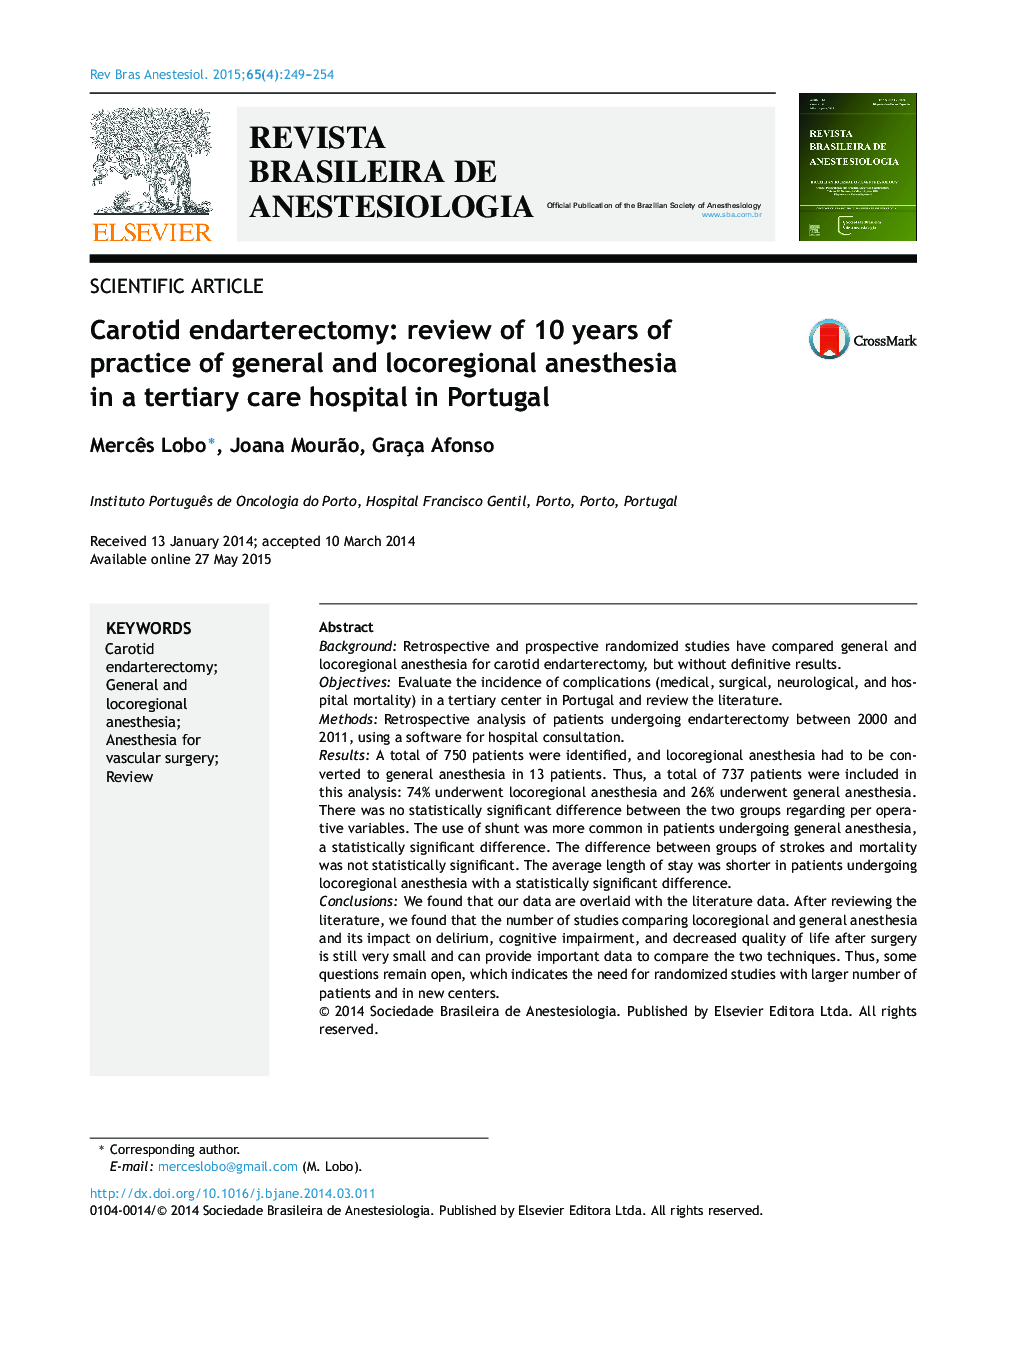 Carotid endarterectomy: review of 10 years of practice of general and locoregional anesthesia in a tertiary care hospital in Portugal